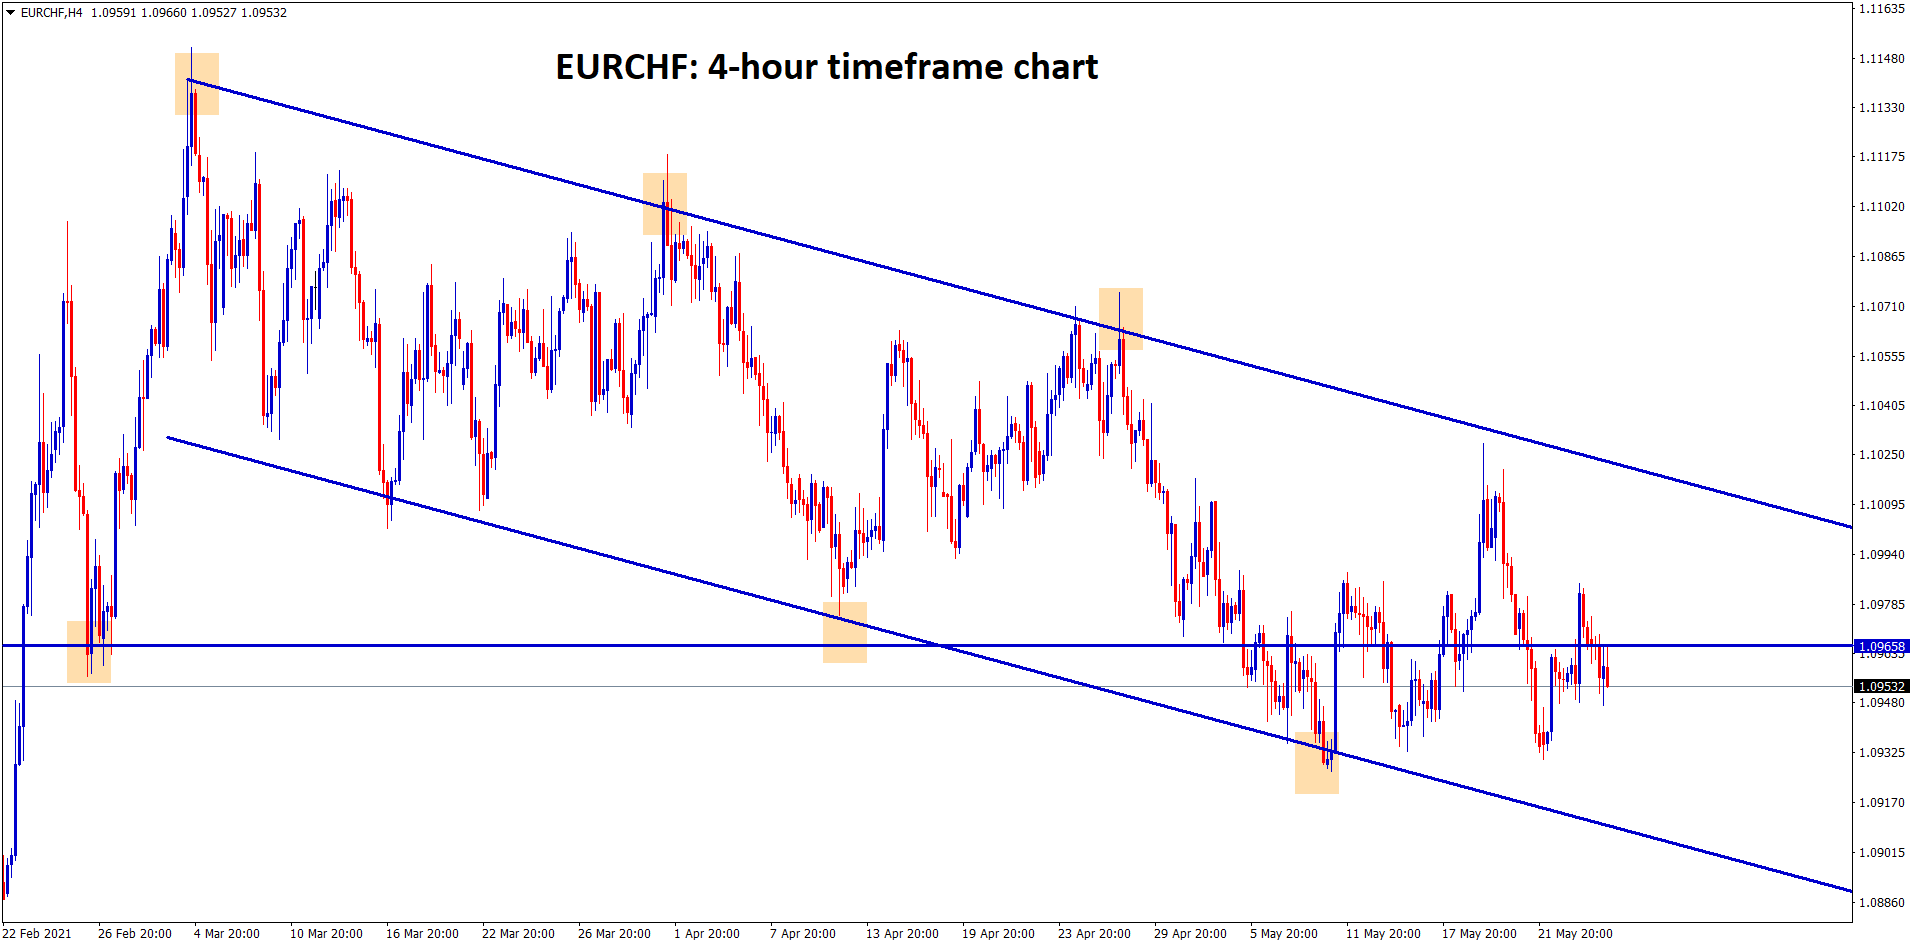 EURCHF is moving between the descending channel range